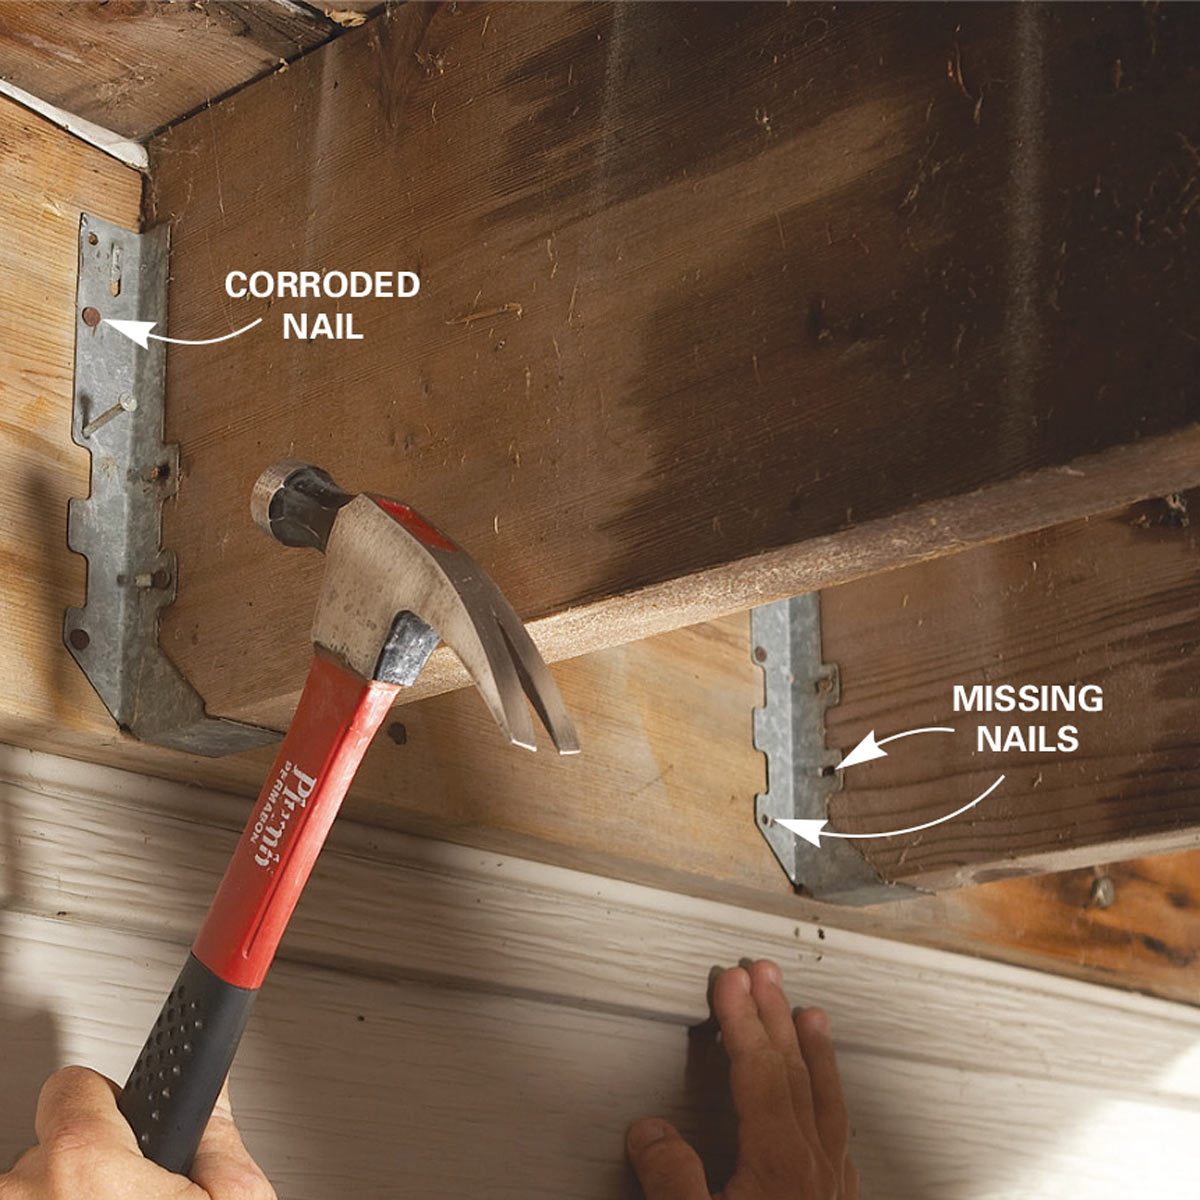 Problem 2: Missing nails in joist hangers